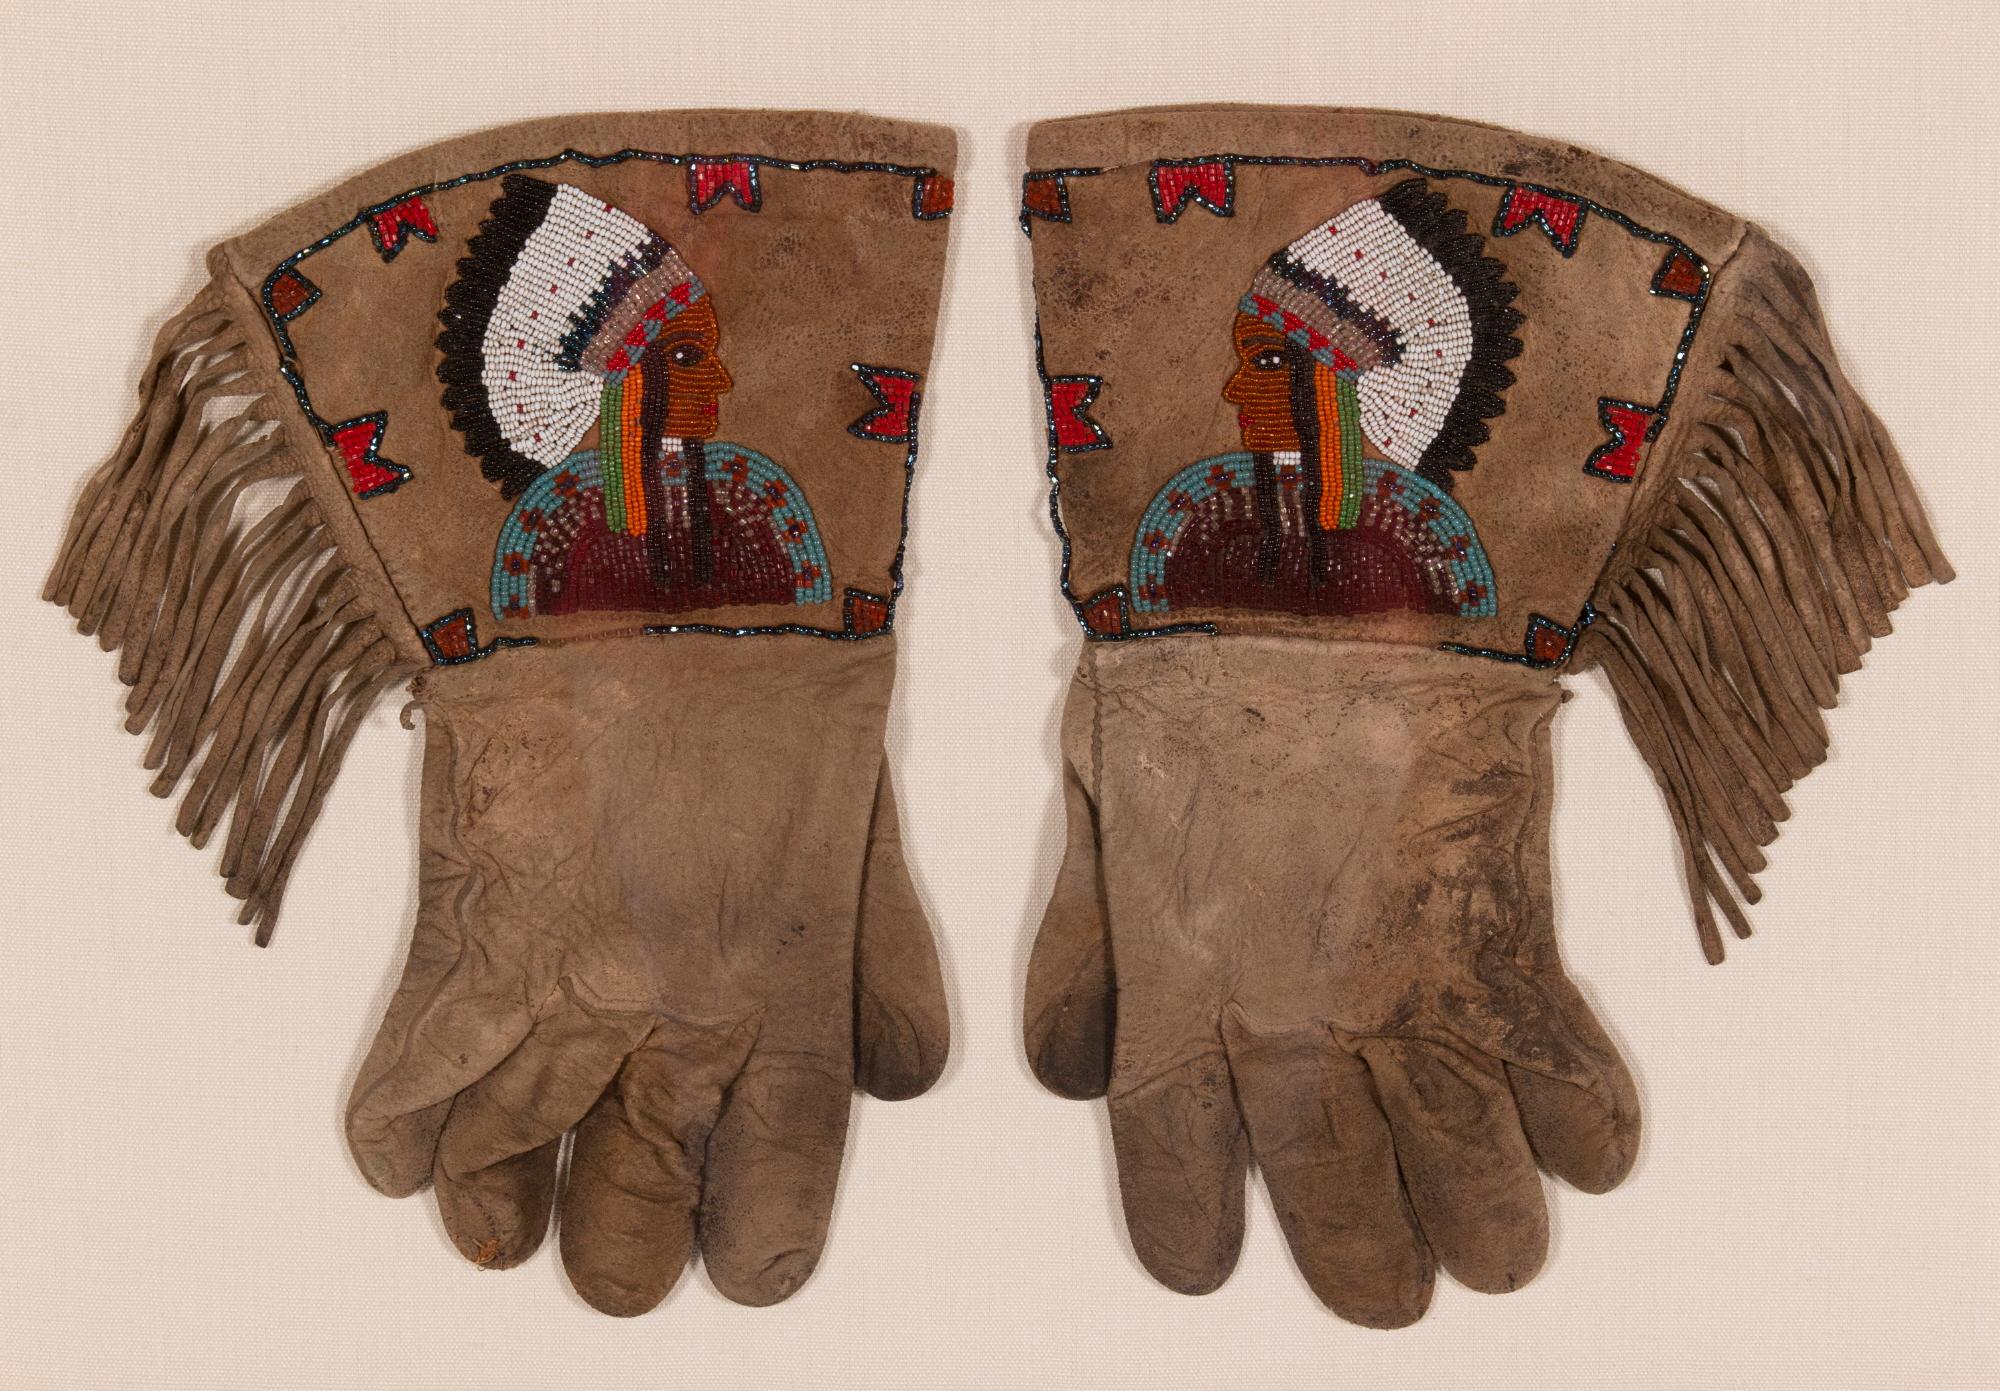 Native American beadwork gauntlets with Indian Chiefs in feathered headdresses, probably souix, Ca 1880-90

Native American beadwork gauntlets with beautiful graphics and endearing wear. Made of doeskin, the imagery includes colorfully dressed